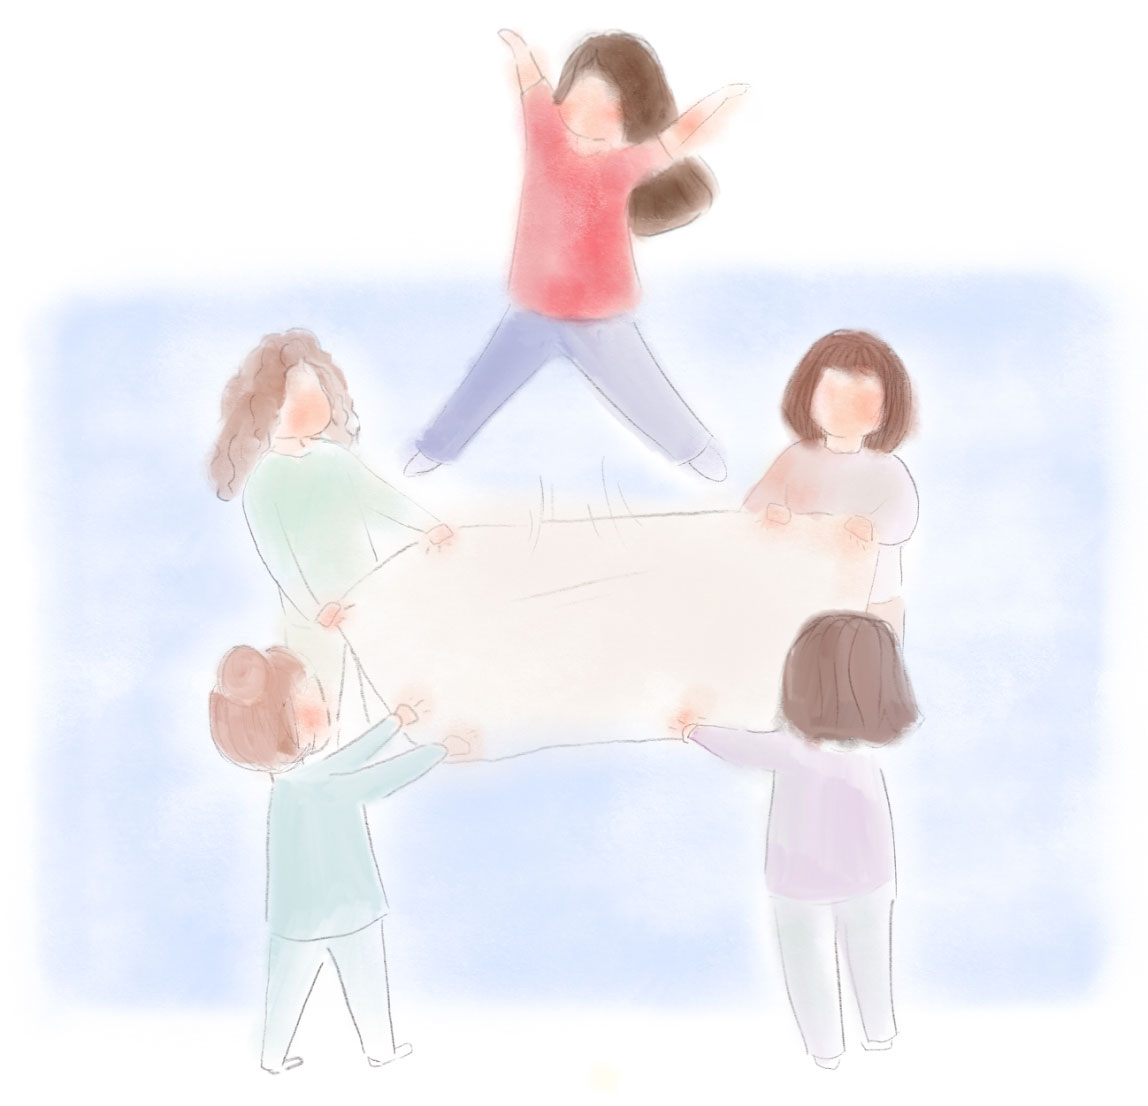 image of a group lifting a girl